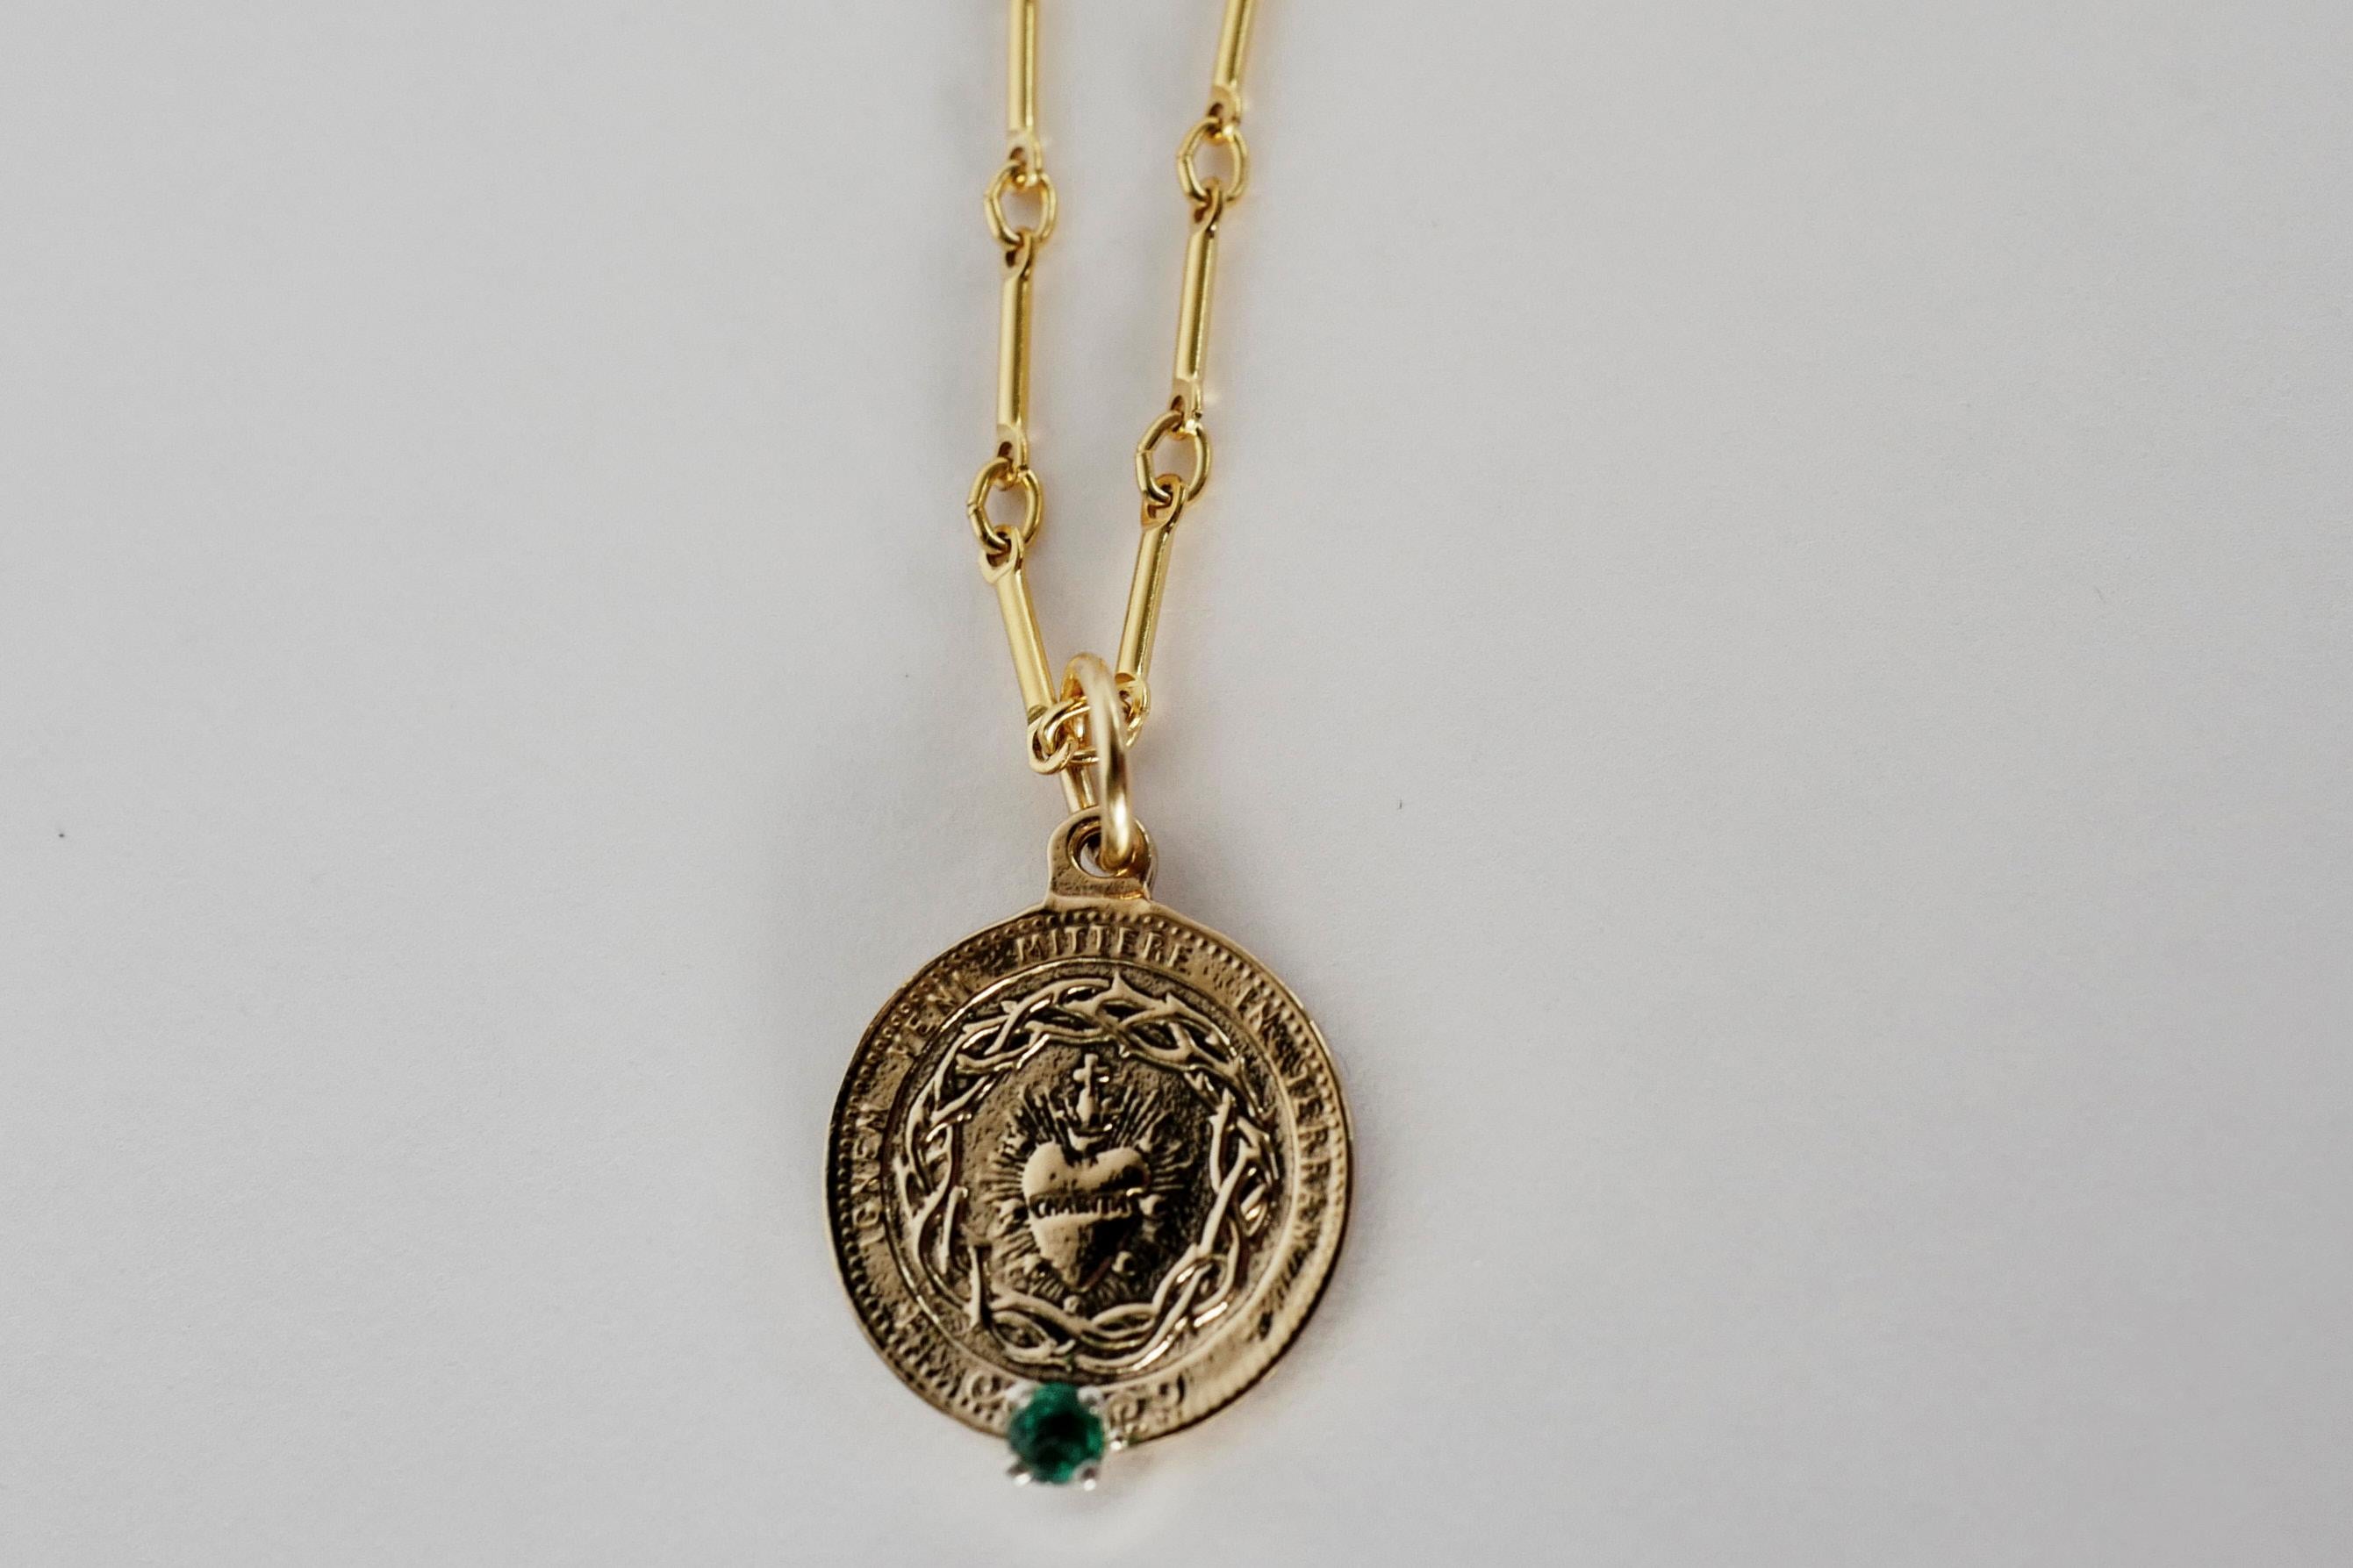 Emerald Sacred Heart Coin Medal Pendant Chain Necklace J Dauphin

The Sacred Heart (also known as the Sacred Heart of Jesus) has one of the deepest meanings in the Roman Catholic practice. The symbol represents Jesus Christ’s actual heart as His